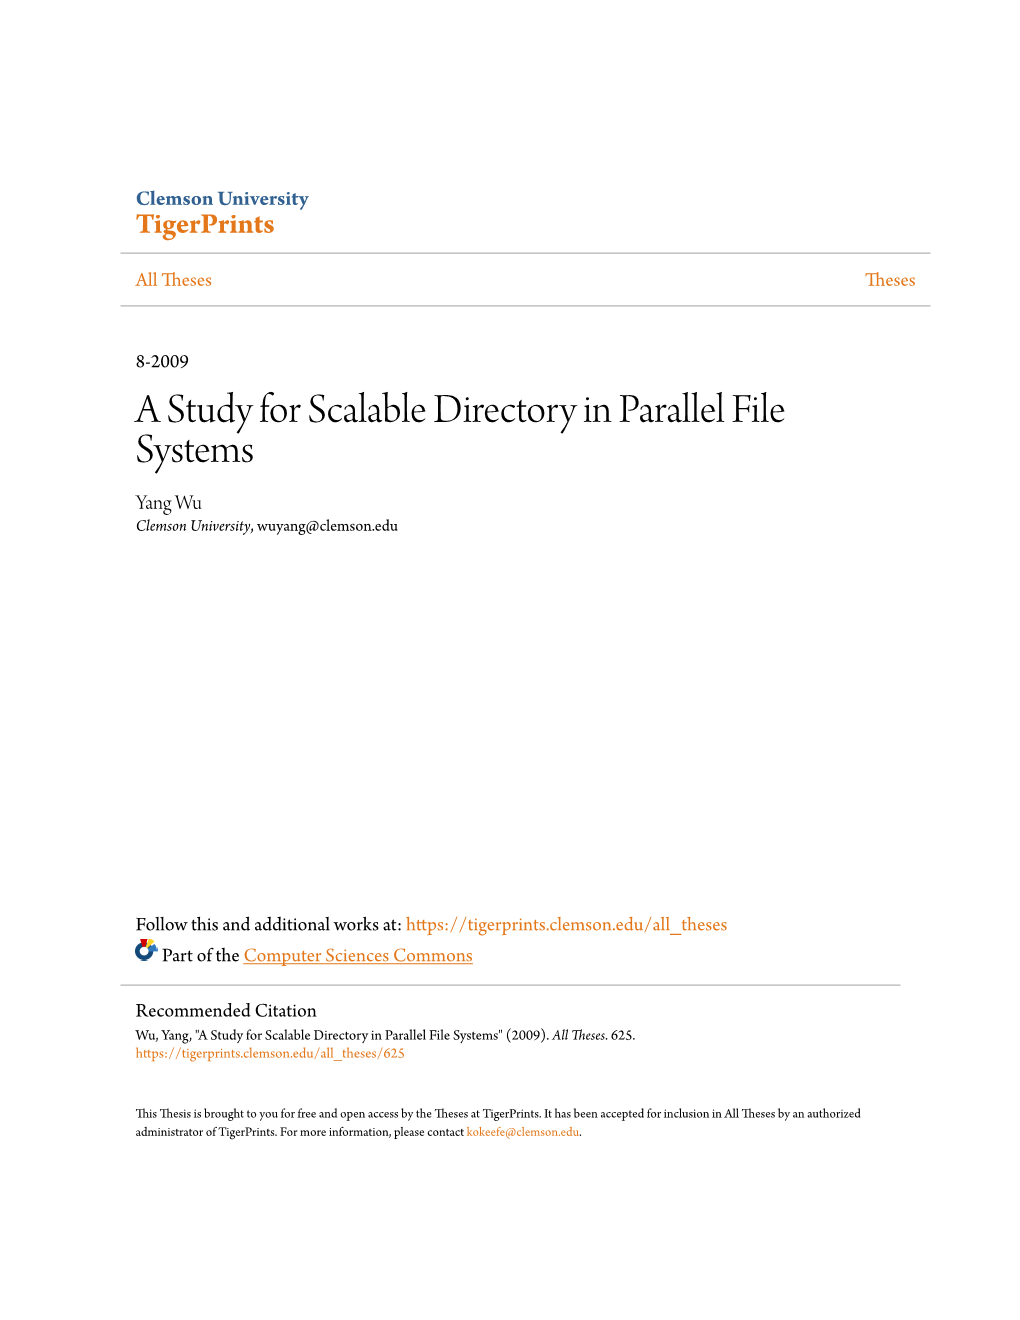 A Study for Scalable Directory in Parallel File Systems Yang Wu Clemson University, Wuyang@Clemson.Edu